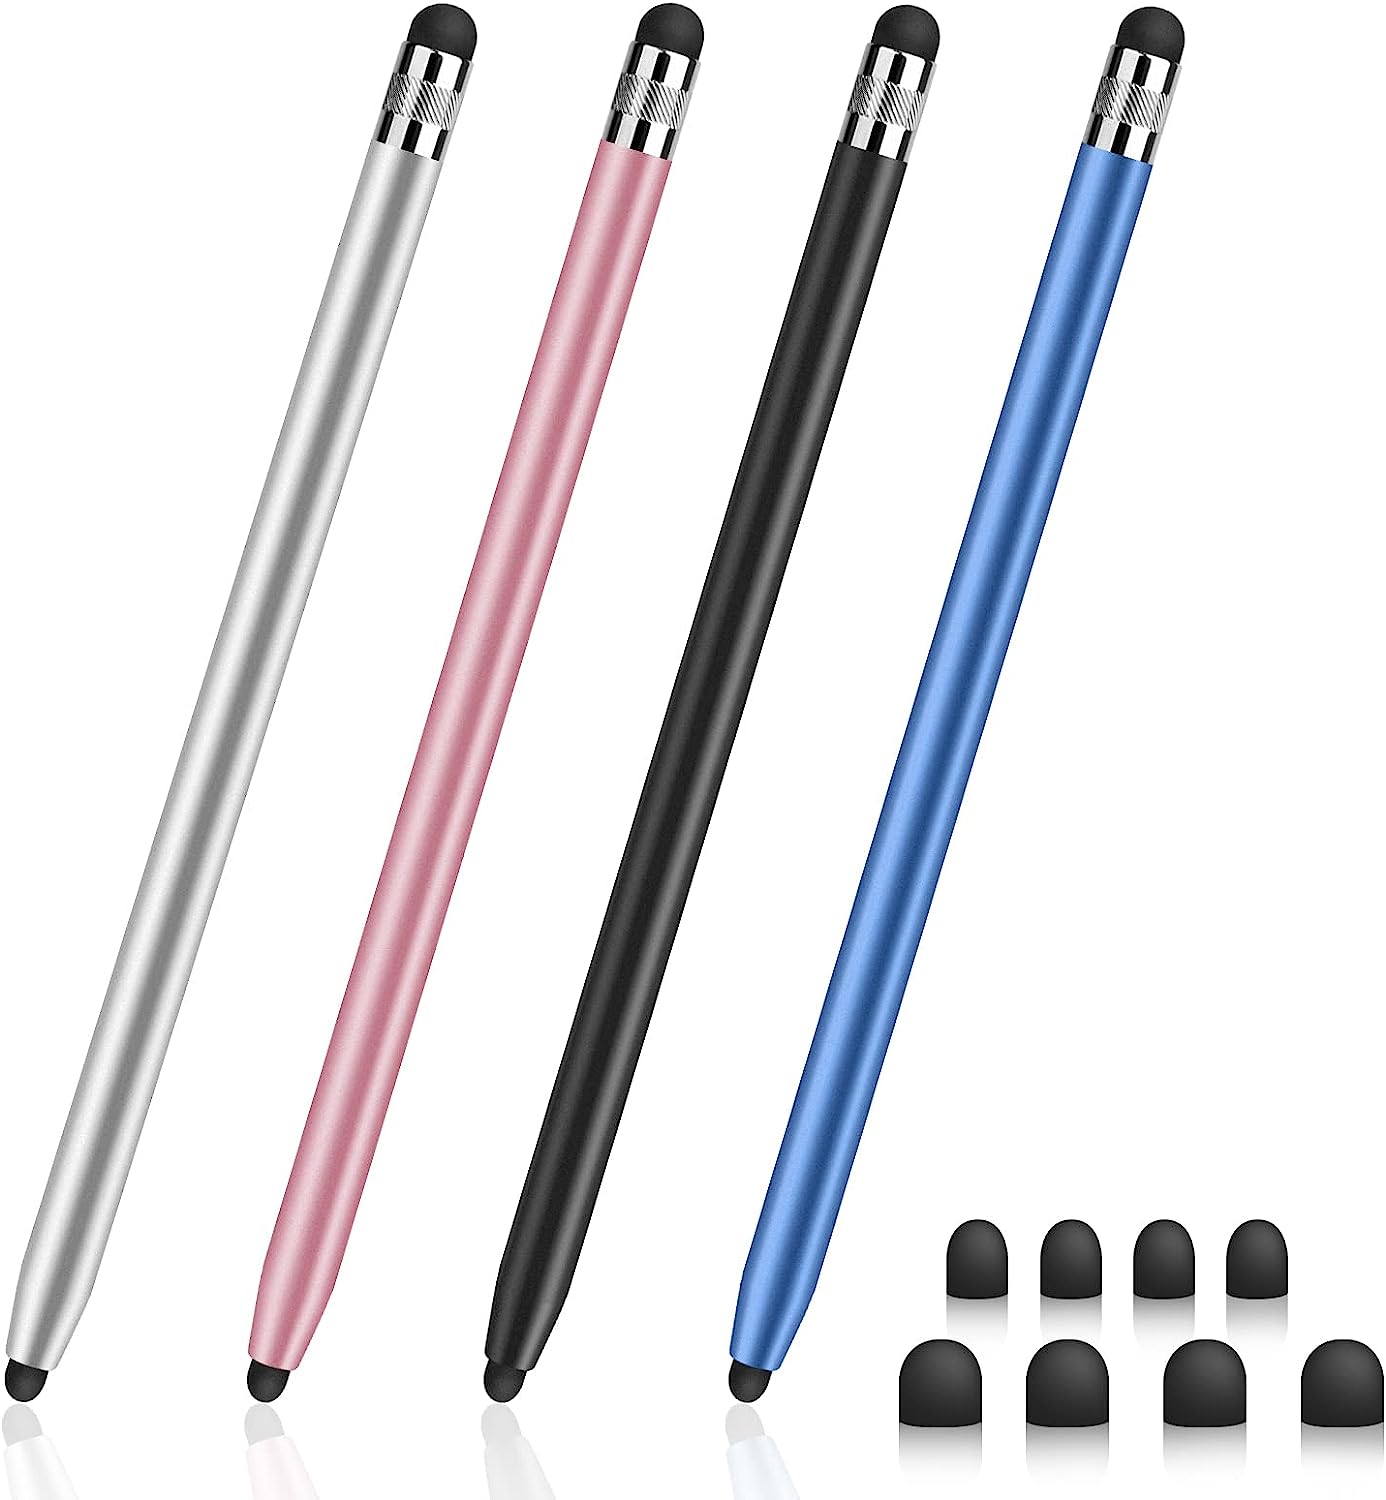 Stylus for Touch Screens, Digiroot 4-Pack Stylus Pens [...]